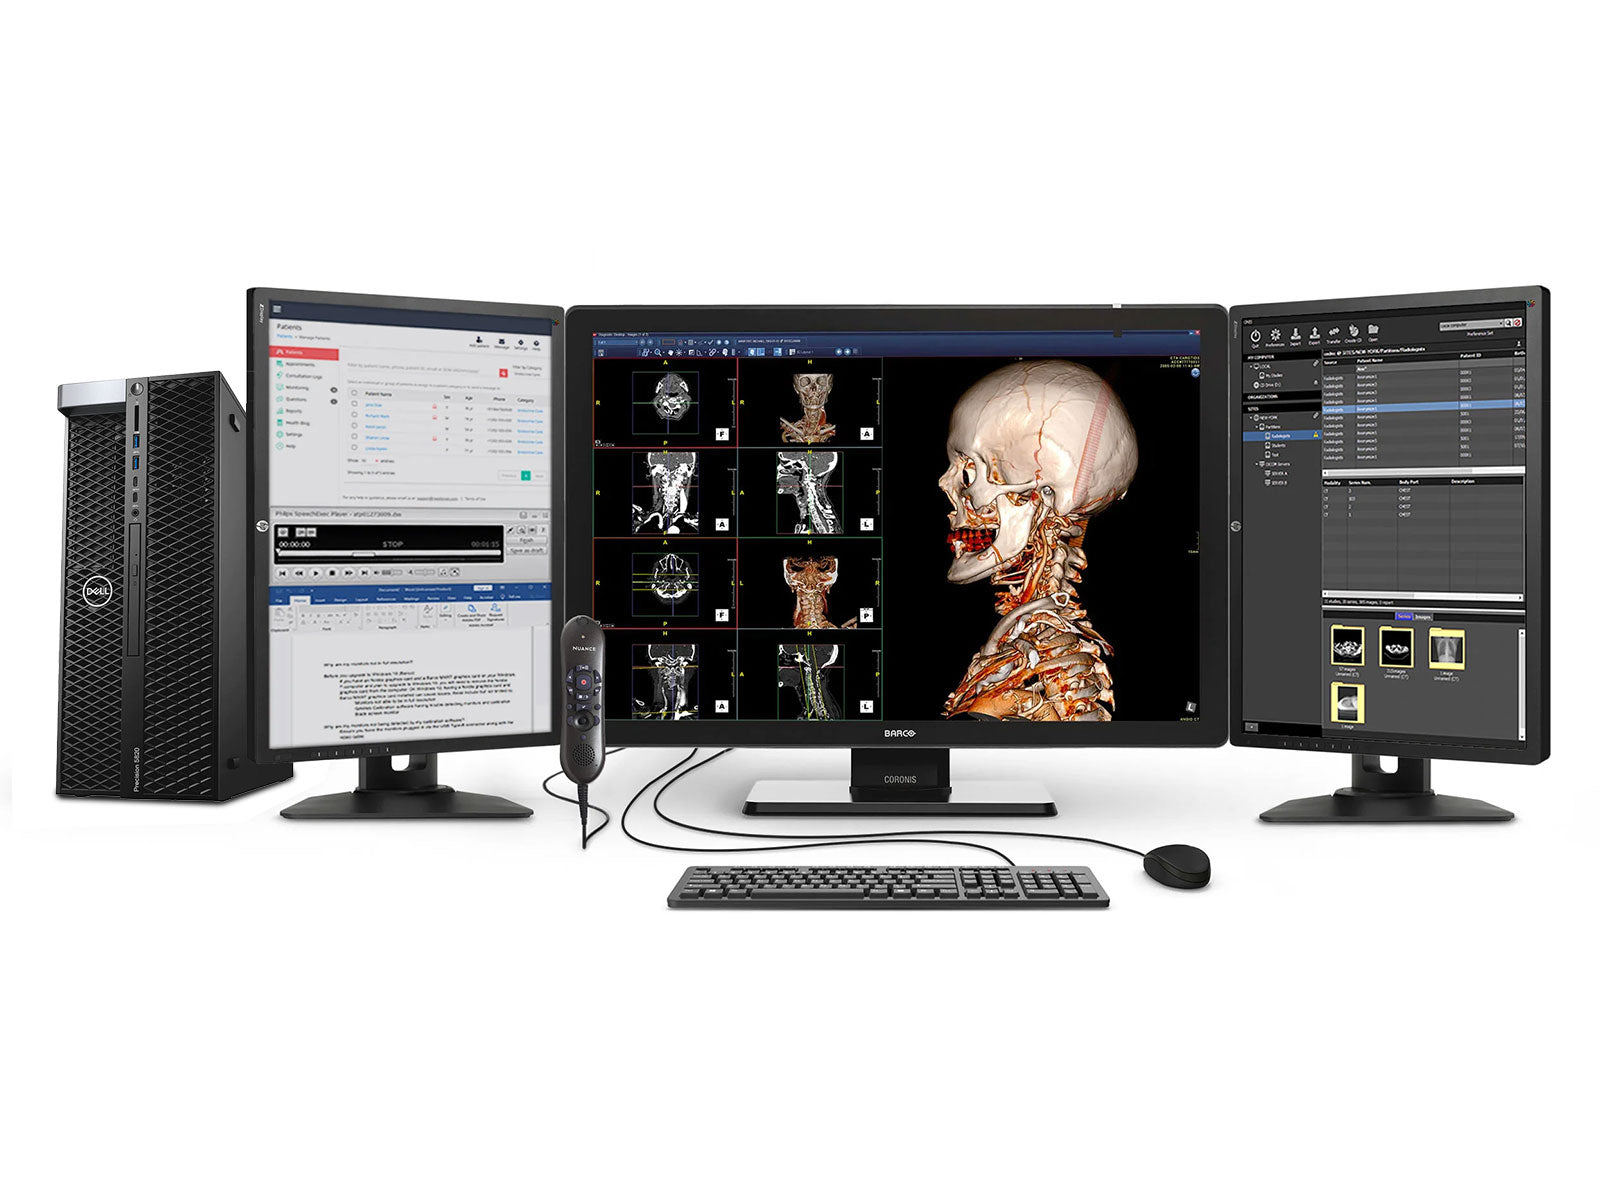 Complete PACS General Radiology Station | Barco 6MP Color LED Display | HP Workstation | Dictation Mic | Worklist Monitor (65305820R) Monitors.com 